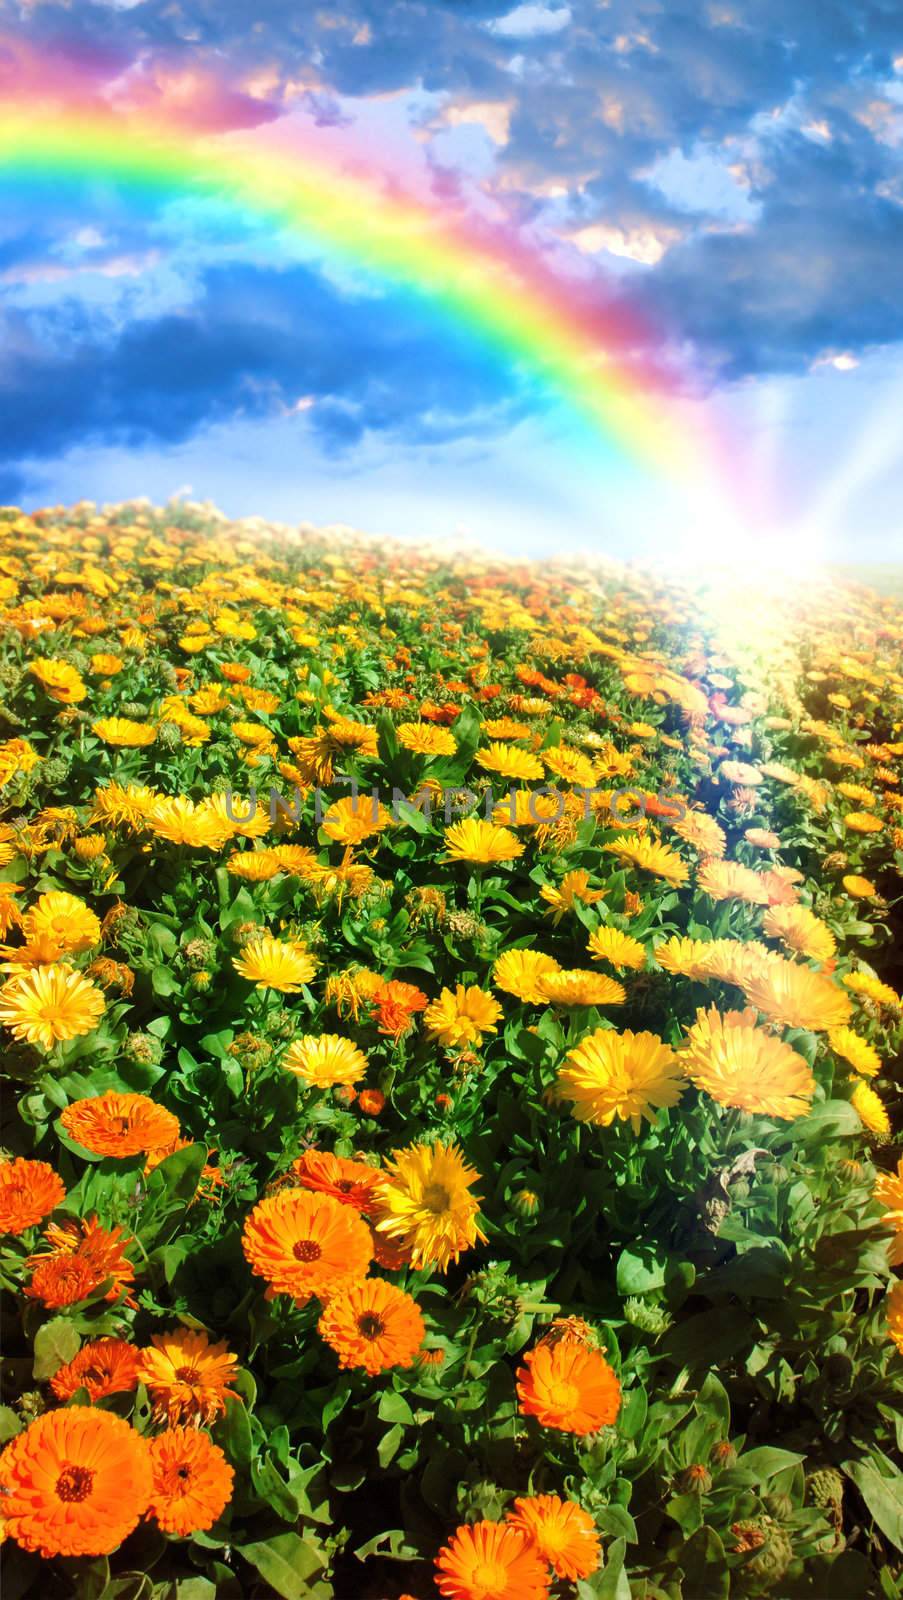 Multicolored flower meadow and rainbow landscape.